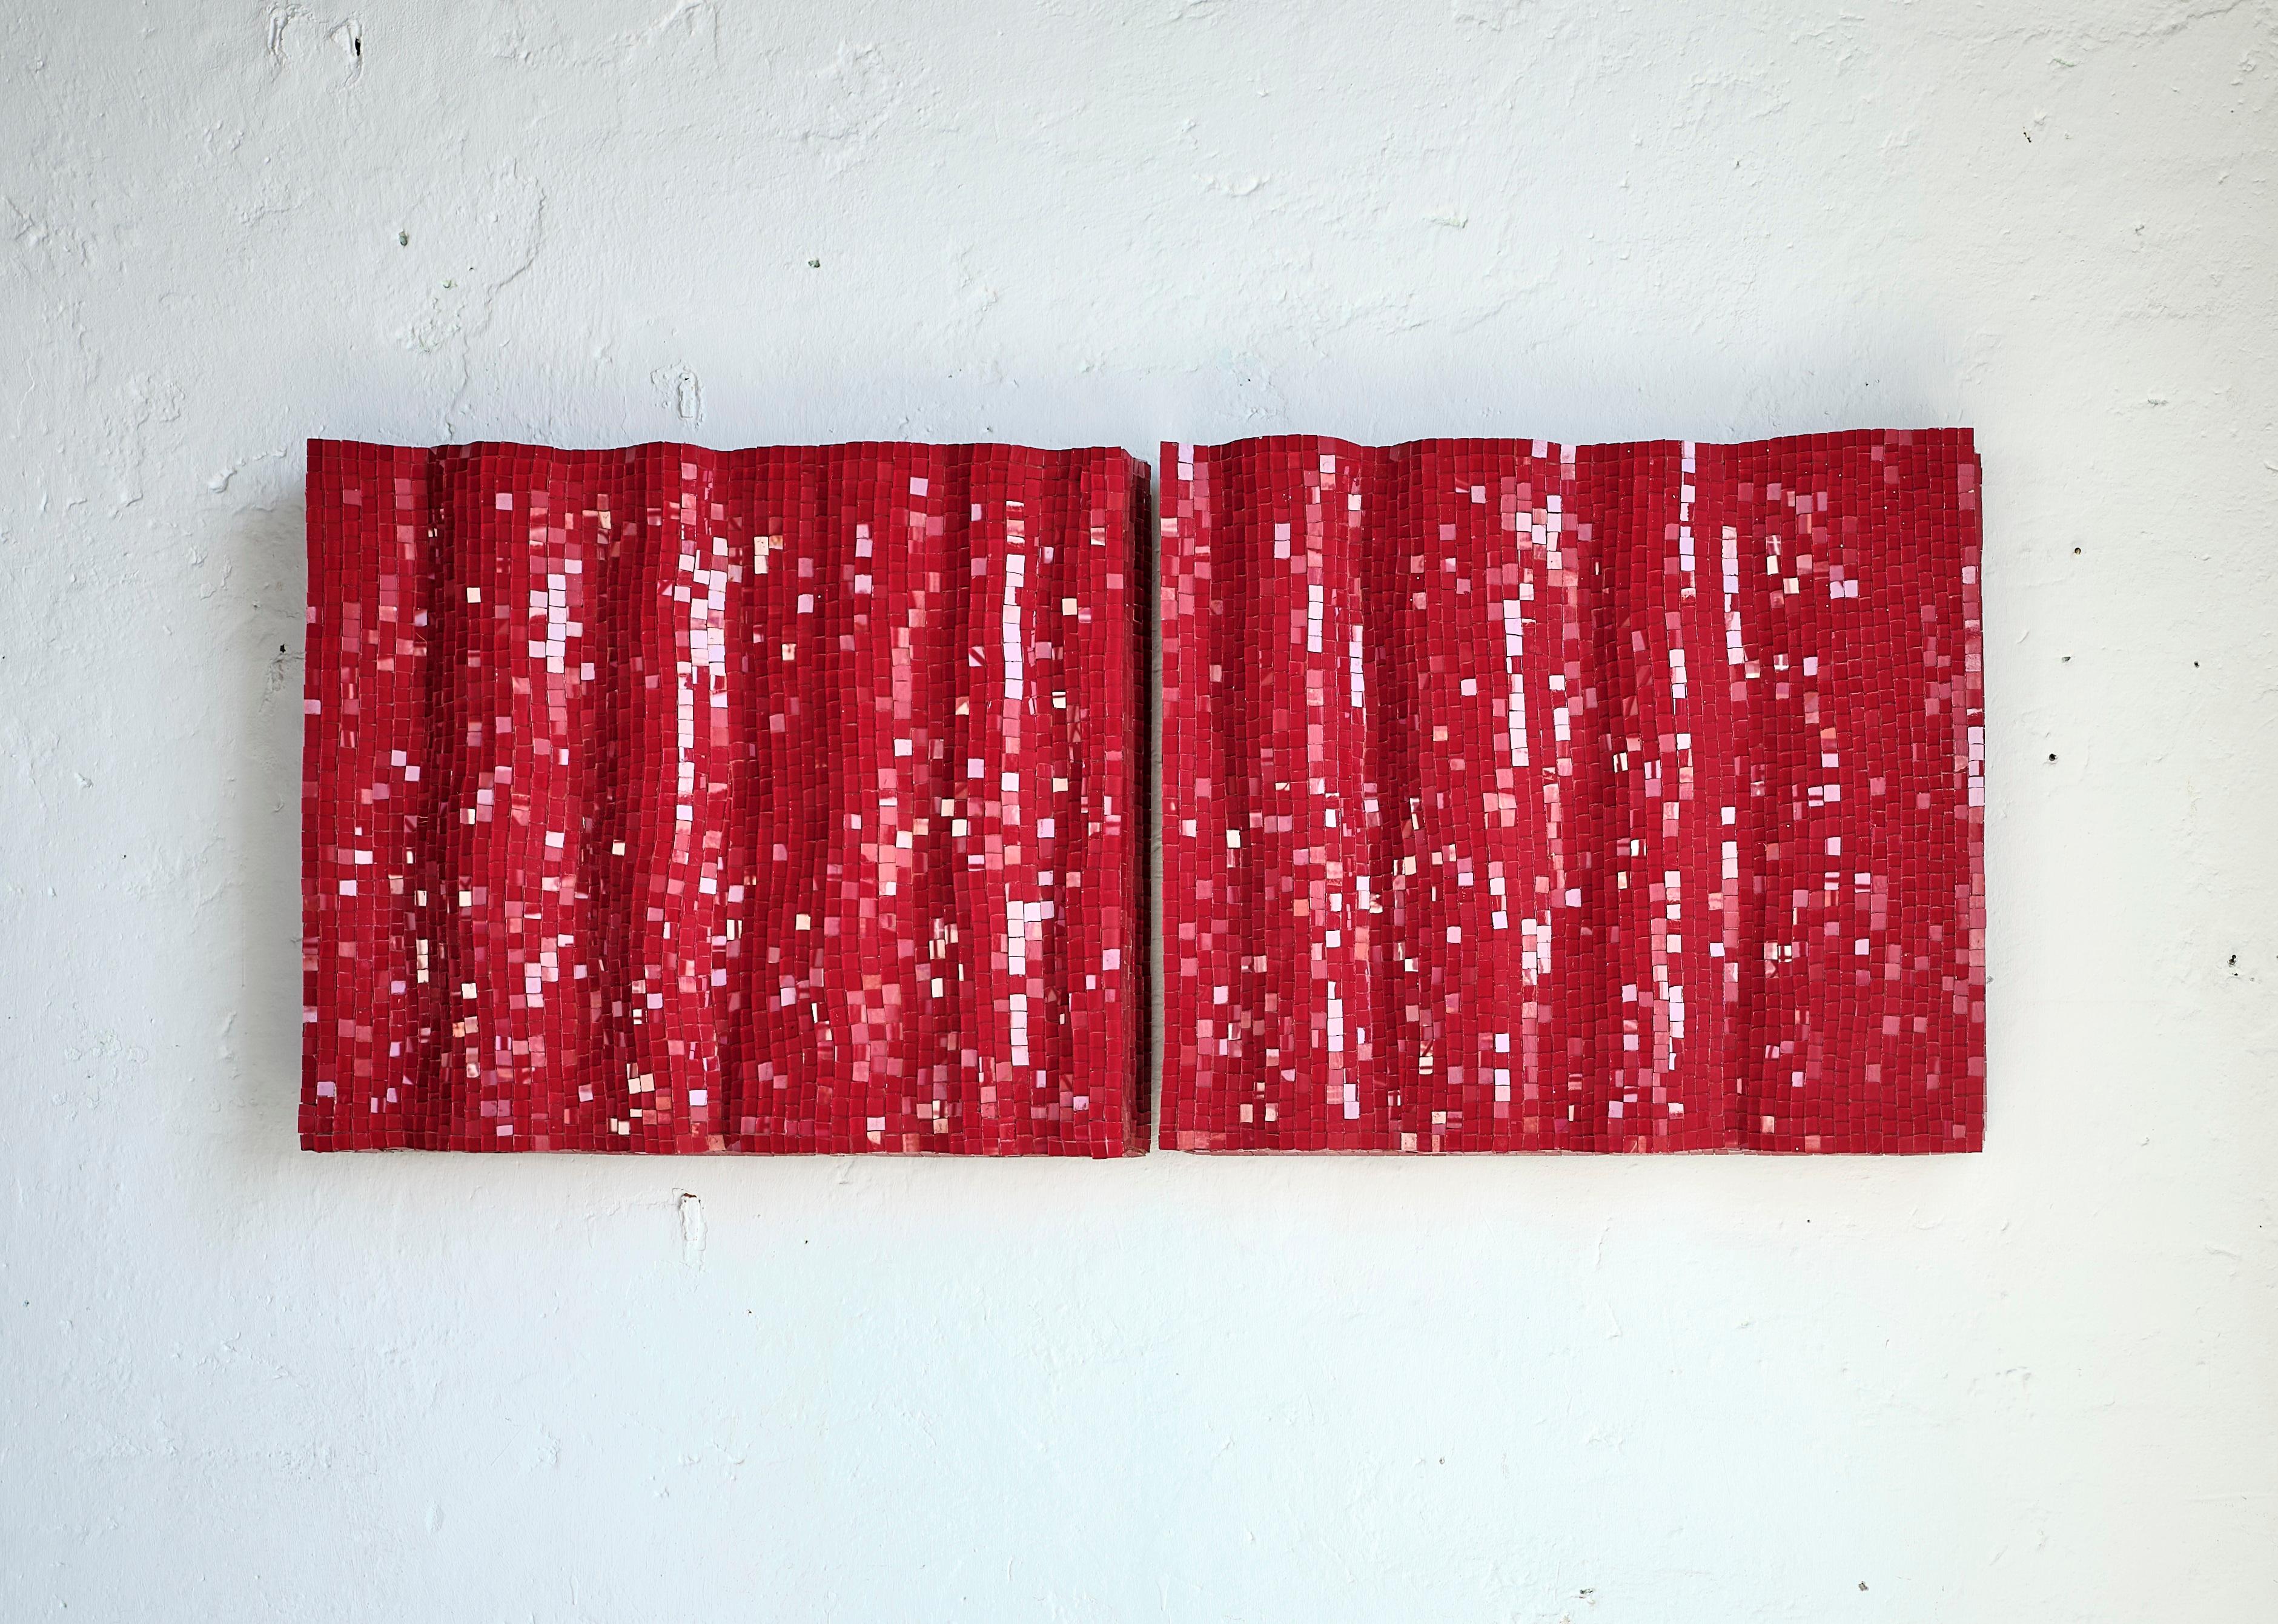 Set Of 2 Modular Decorative Red Glass Mosaic Panels by Davide Medri
Dimensions: D 10 x W 85 x H 85 cm (each panel).
Materials: Red glass mosaic.

Available in two different sizes: 85 x 85 cm and 70 x 70 cm. Also available in a mirror mosaic option.